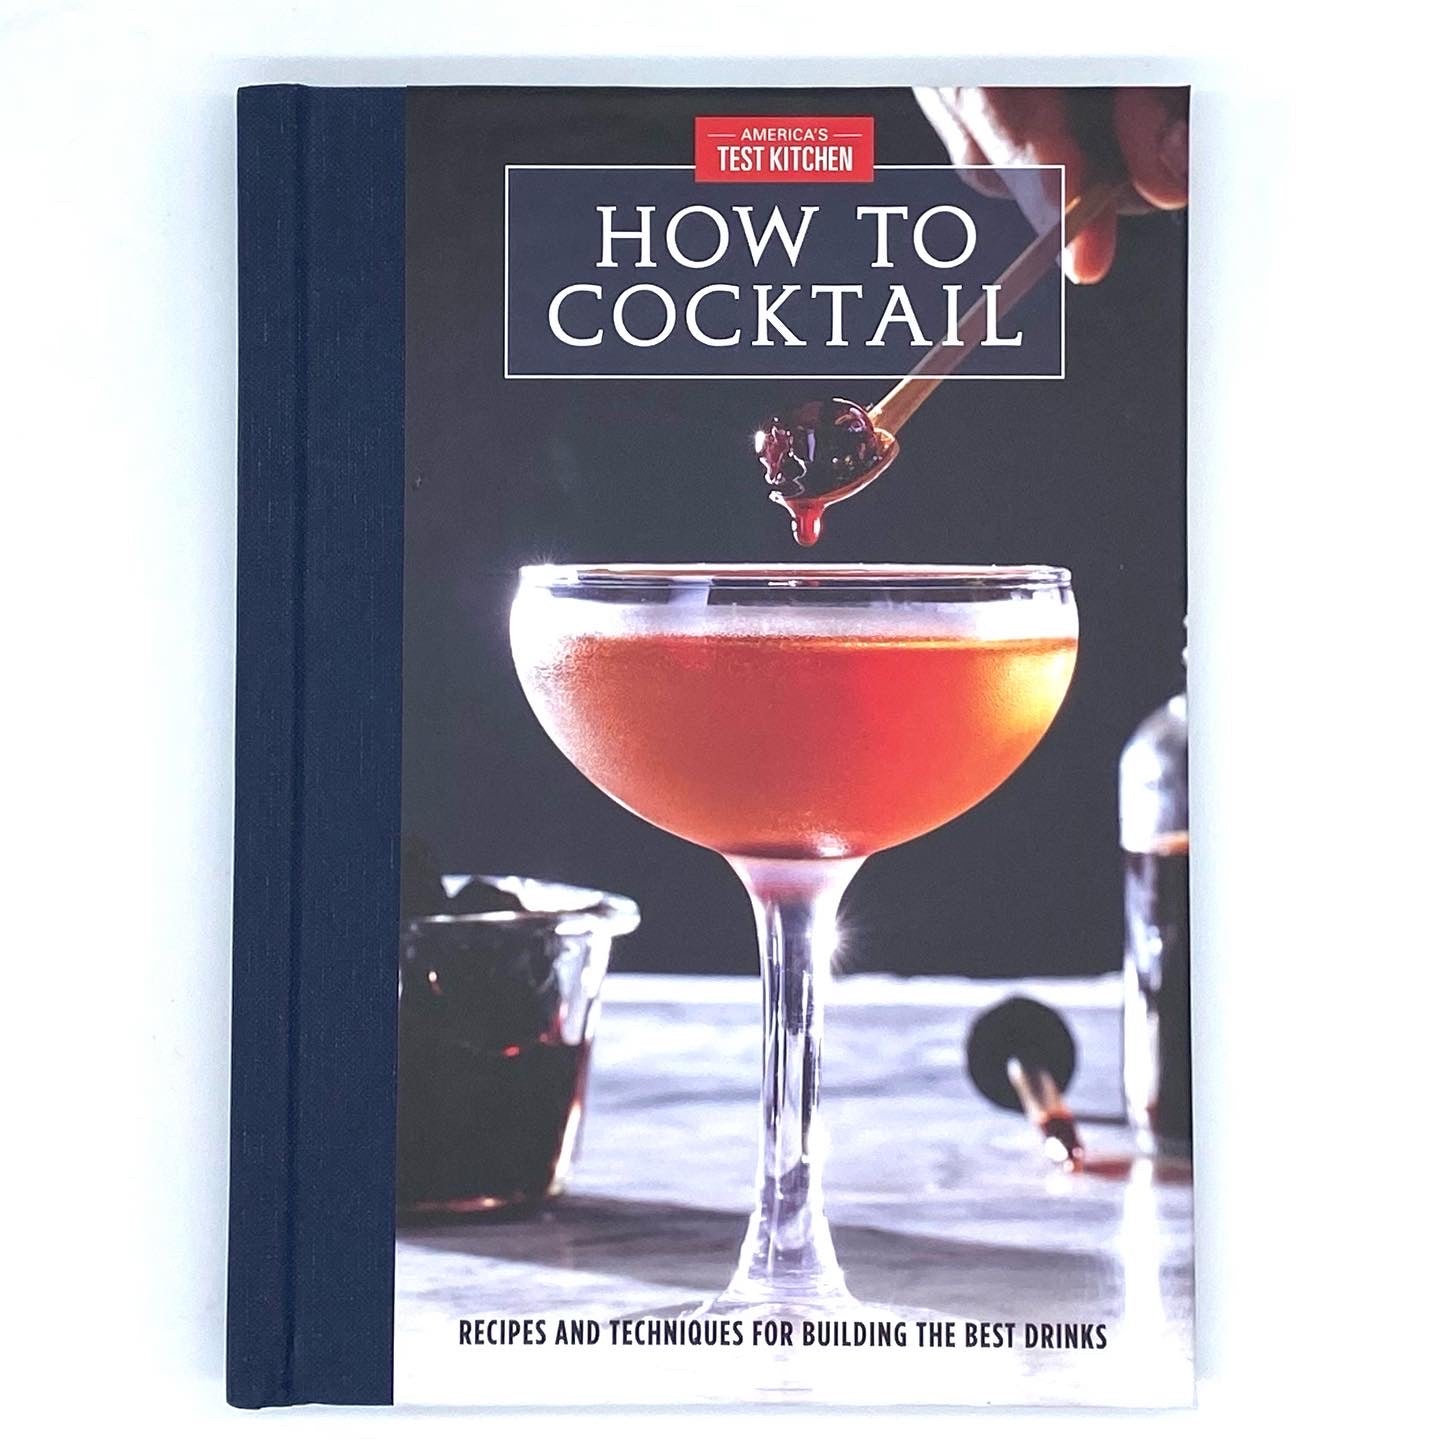 How to Cocktail